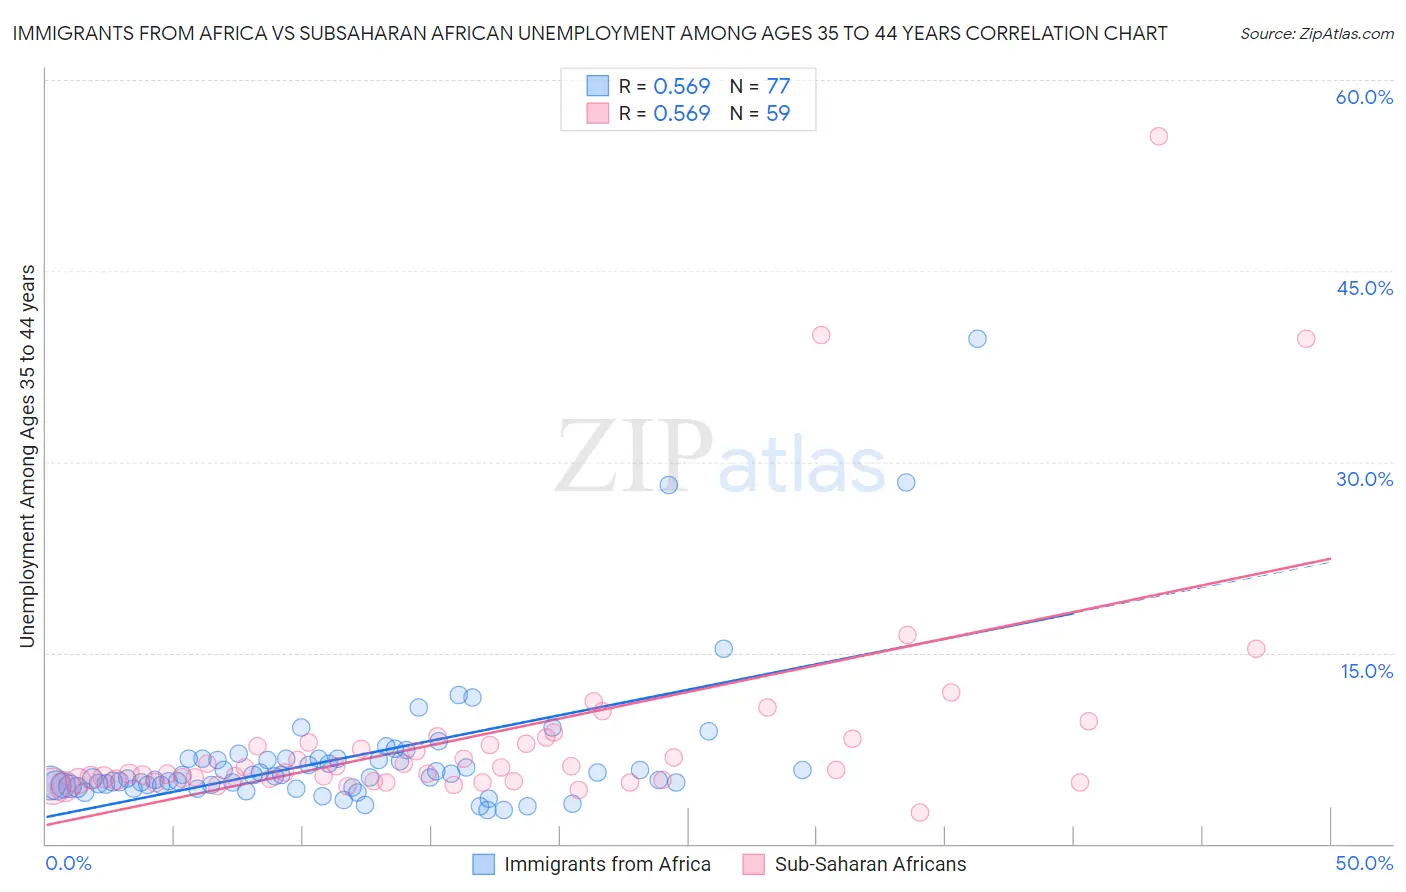 Immigrants from Africa vs Subsaharan African Unemployment Among Ages 35 to 44 years